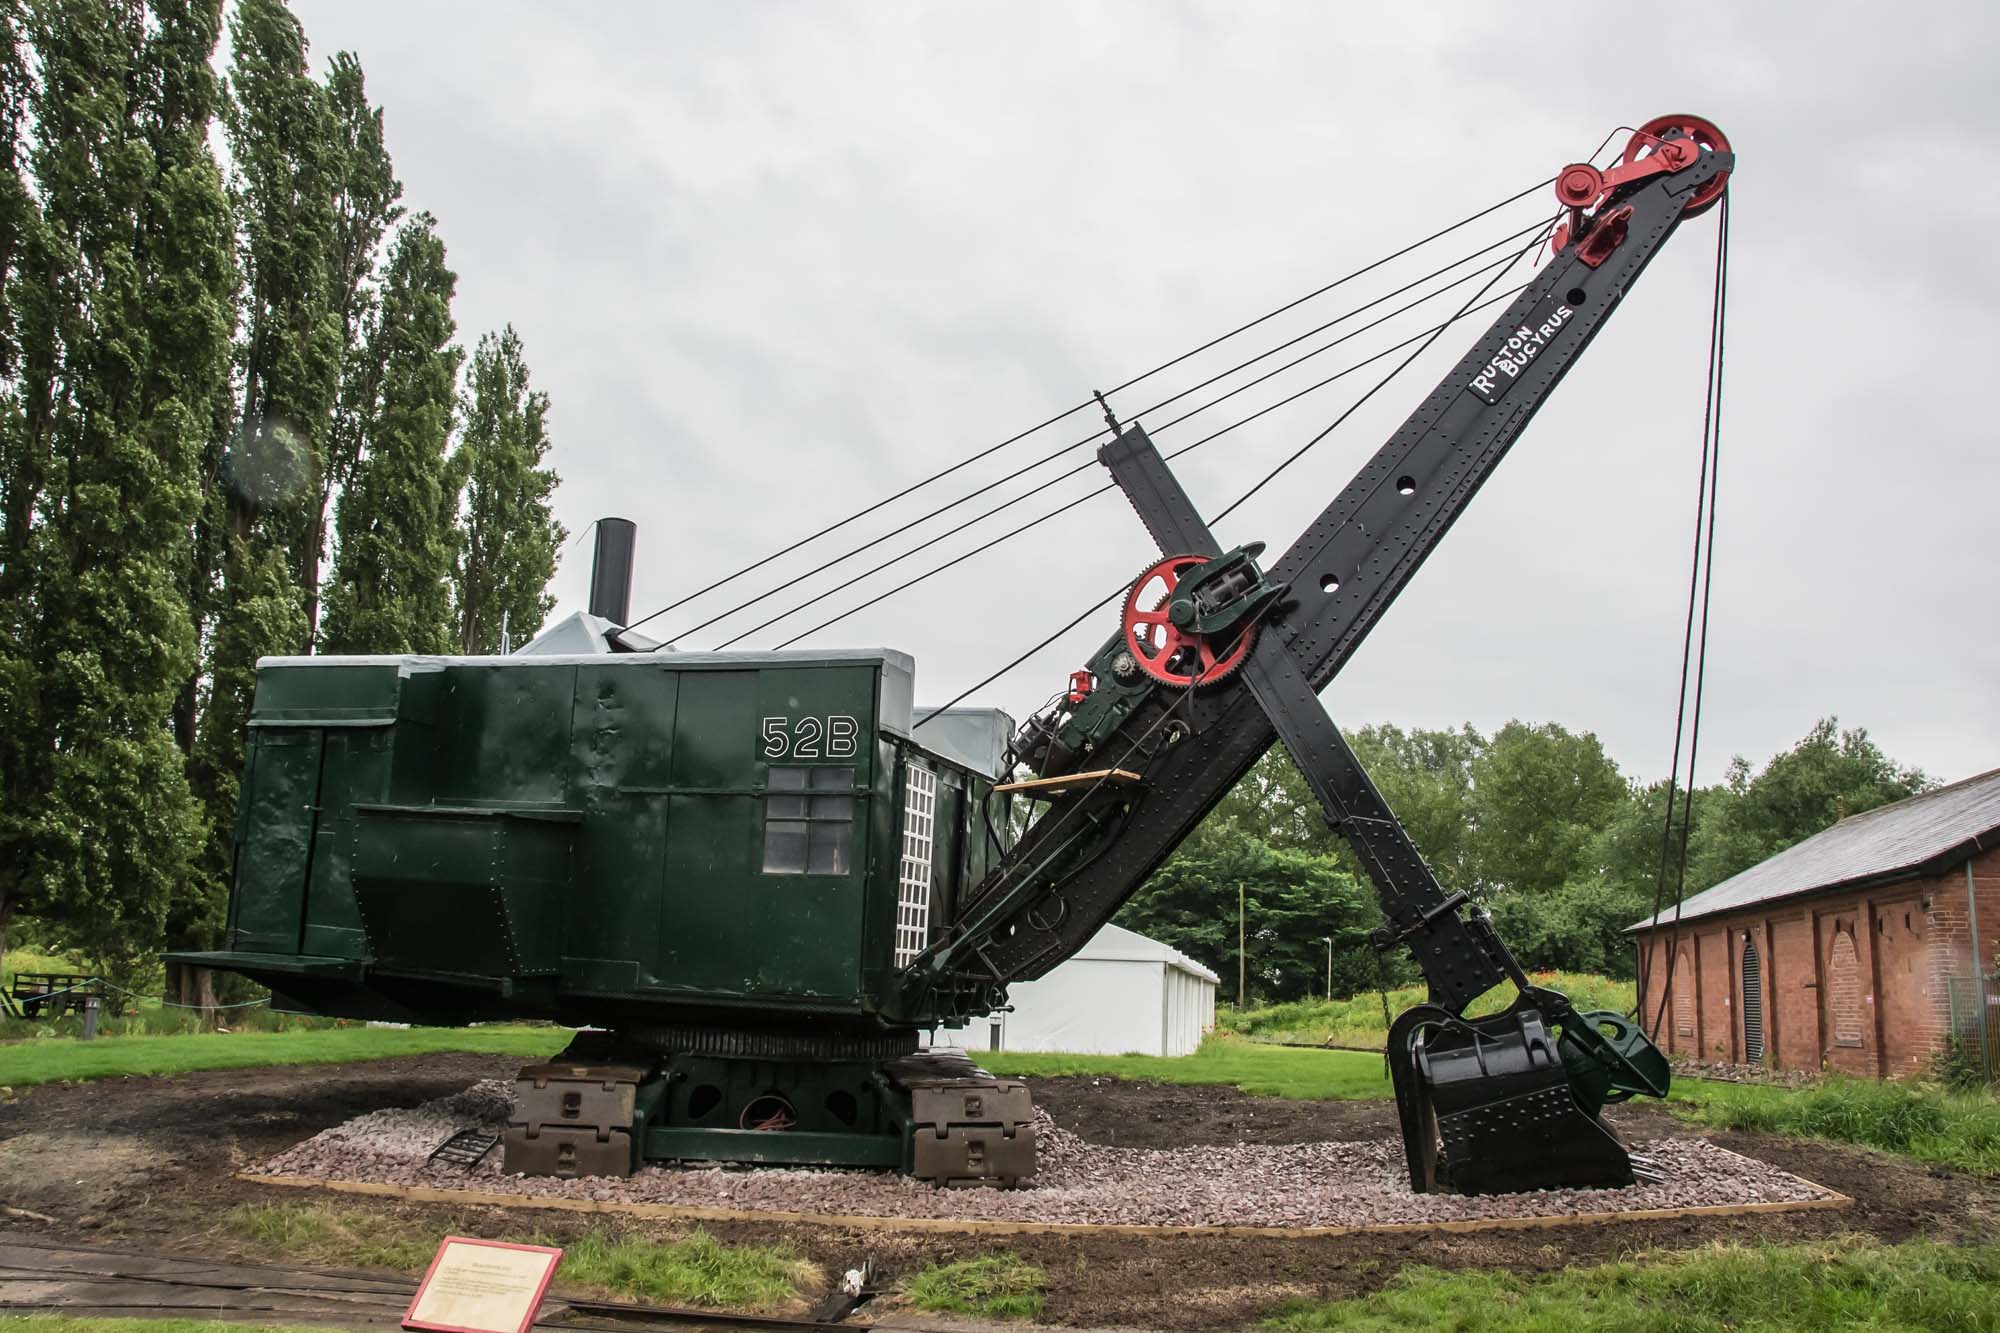 You can see this beautifully restored steam shovel in the grounds of the museum - 